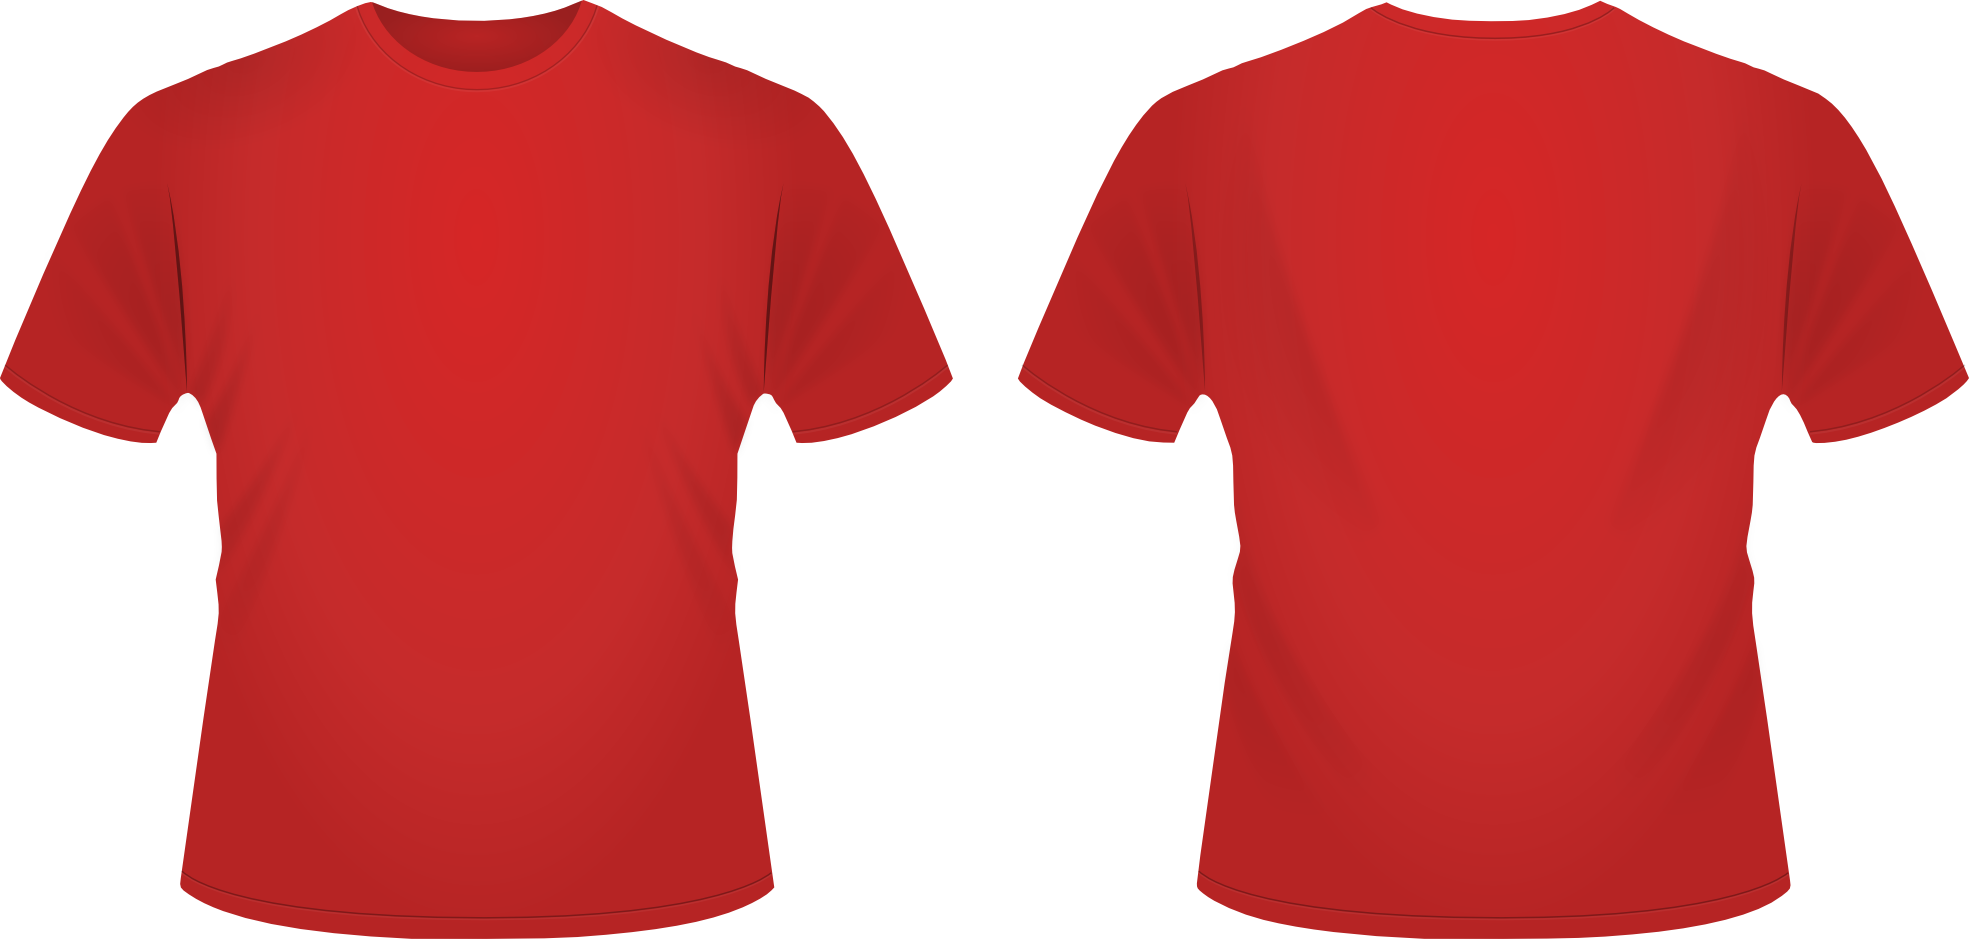 12 T Shirt Template Red Free Cliparts That You Can Download To You    